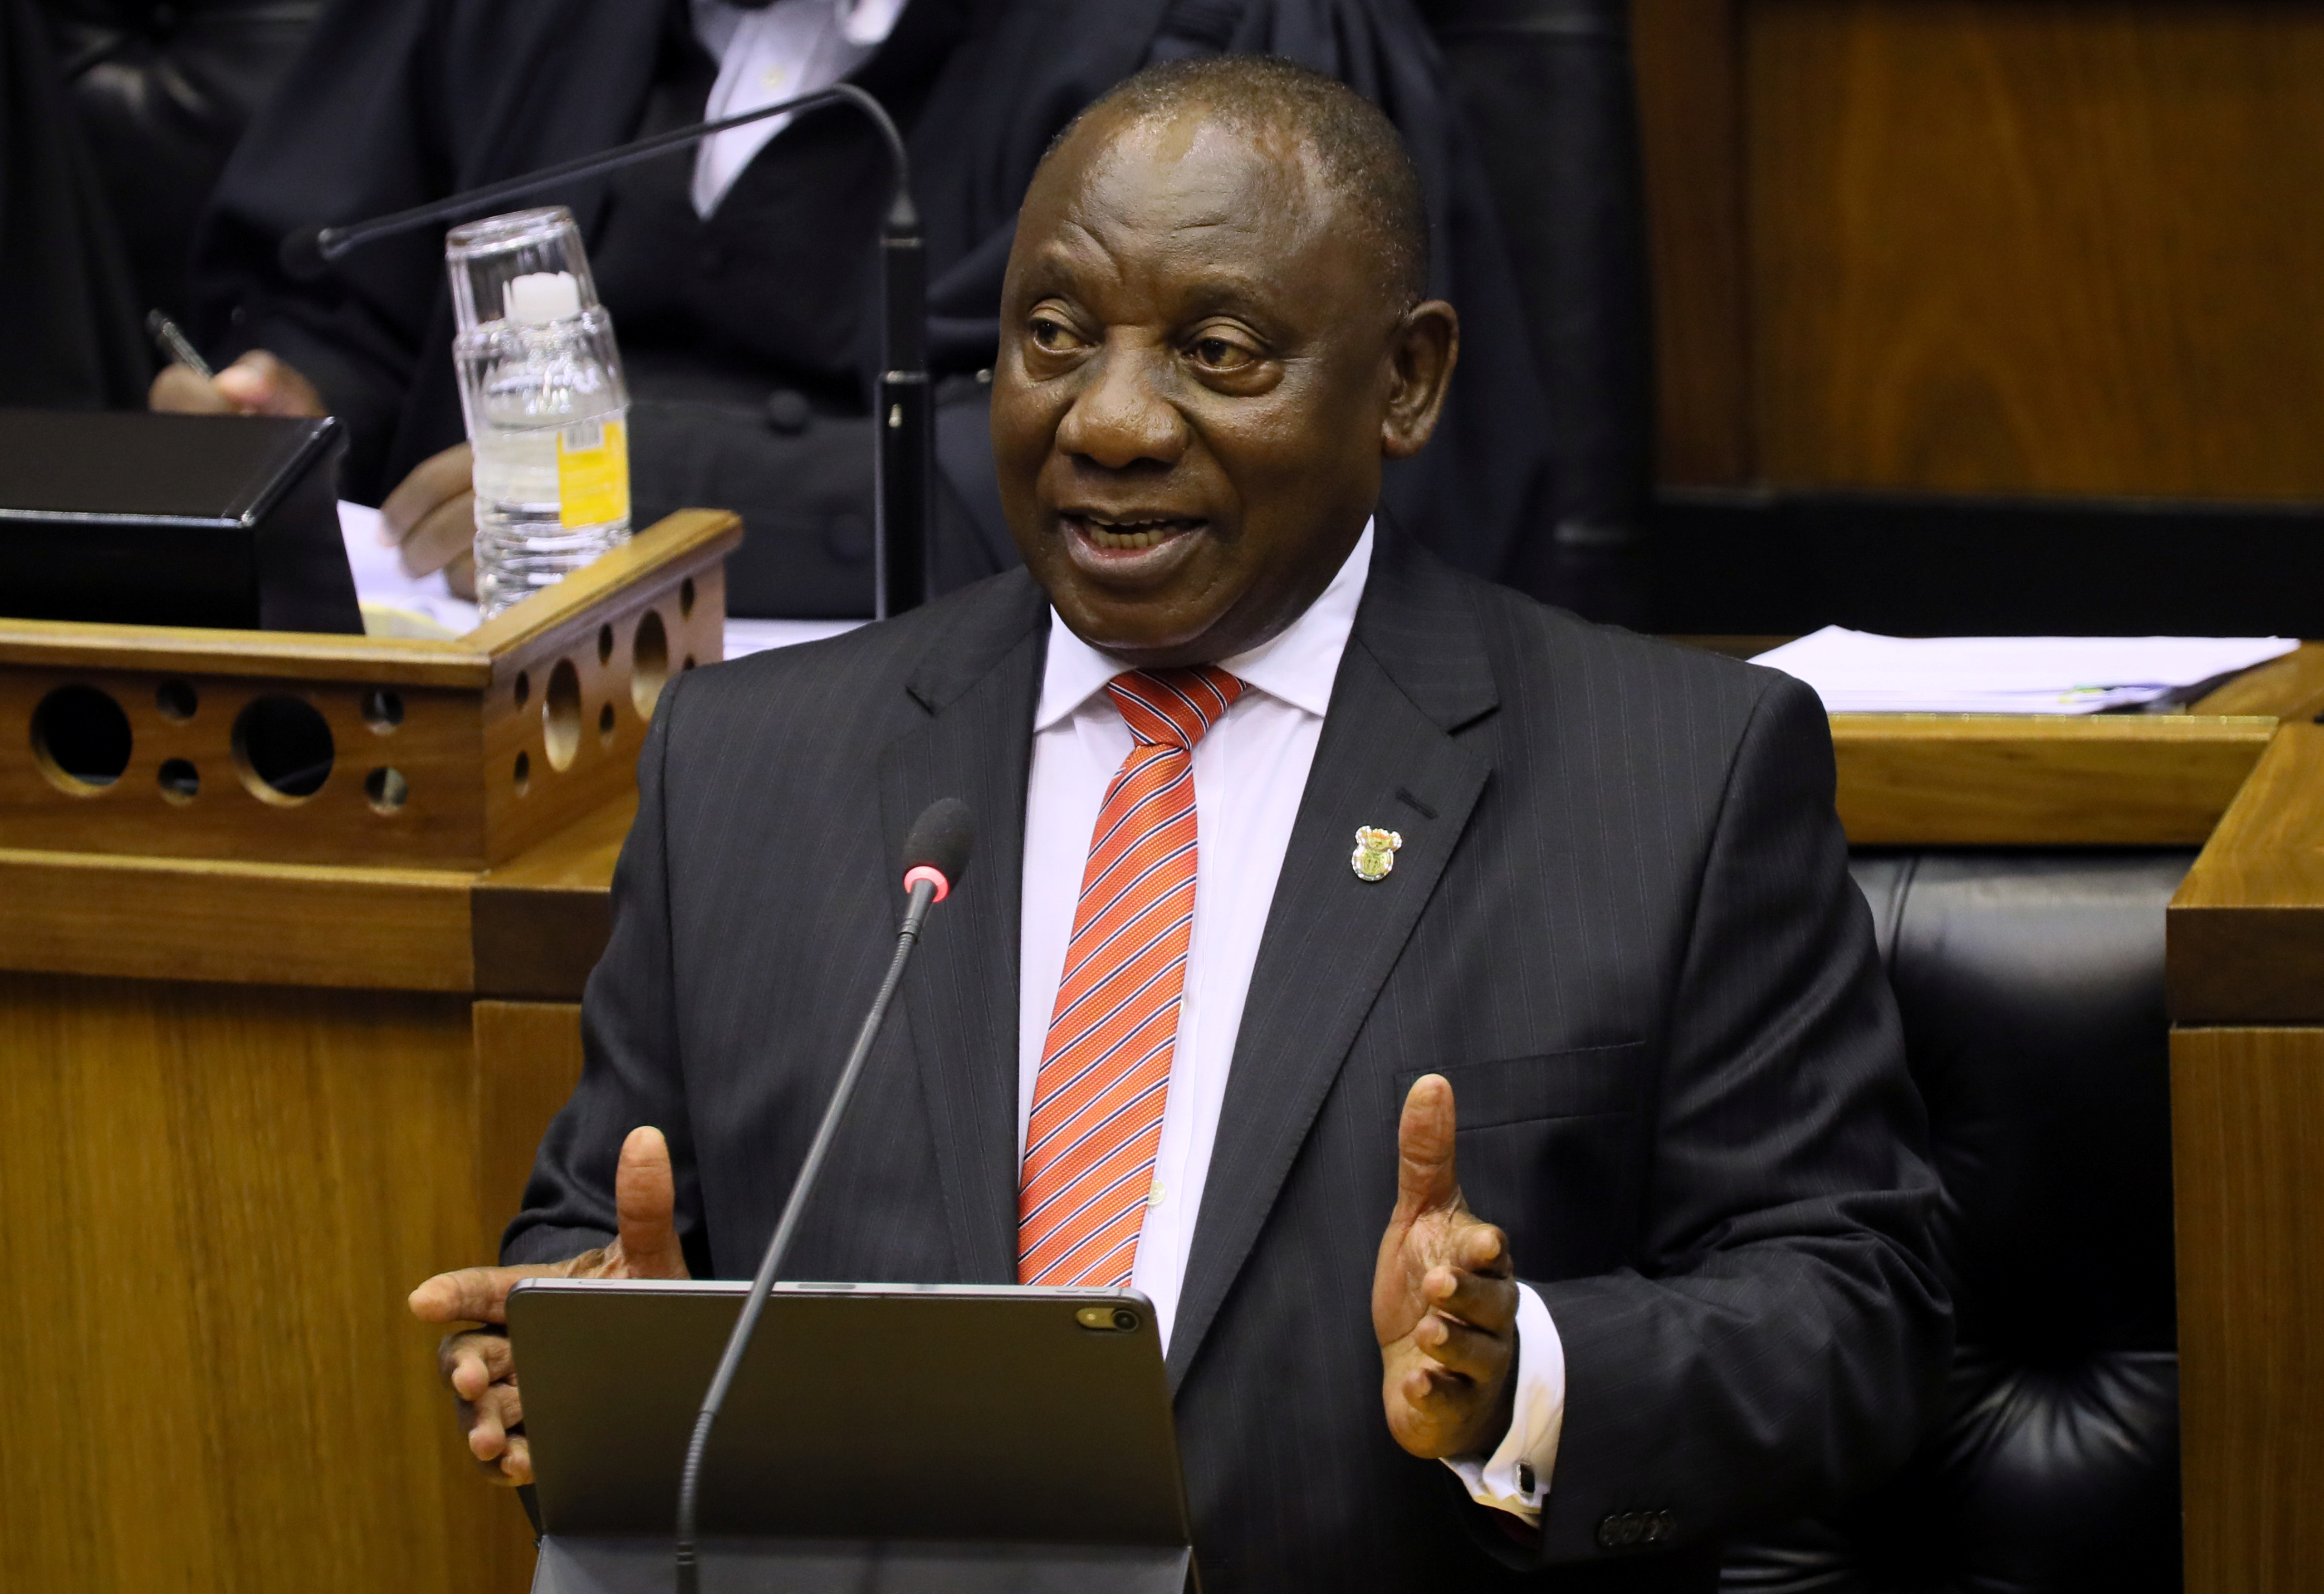 President Cyril Ramaphosa delivers his State of the Nation address at parliament in Cape Town